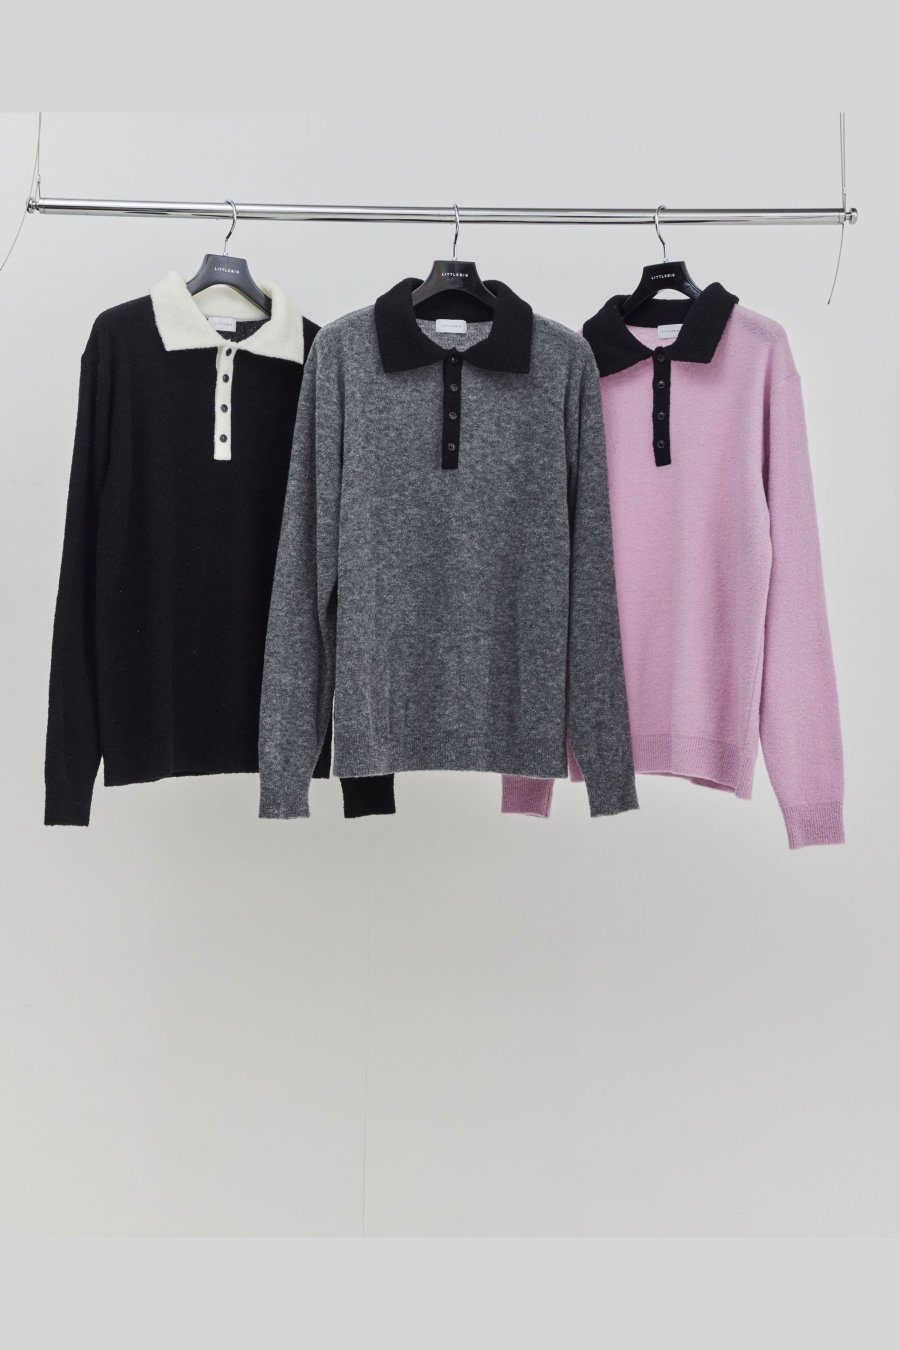 LITTLEBIG 22aw Knit Polo(Black or Grey or Pink)<img class='new_mark_img2' src='https://img.shop-pro.jp/img/new/icons15.gif' style='border:none;display:inline;margin:0px;padding:0px;width:auto;' />